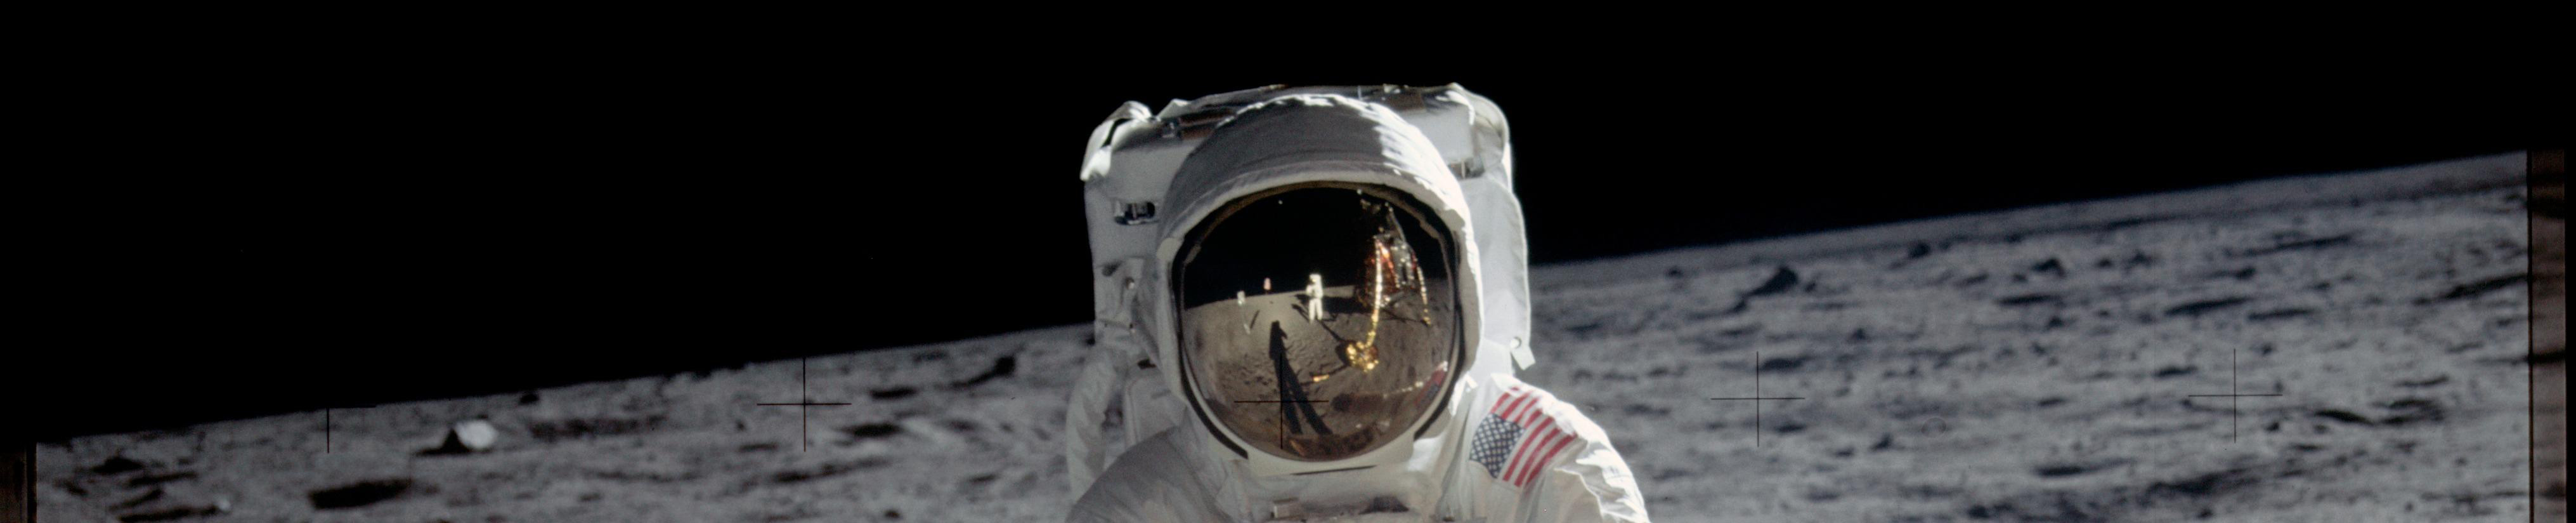 Buzz Aldrin on the Moon, taken by Neil Armstrong who can be seen in the visor reflection